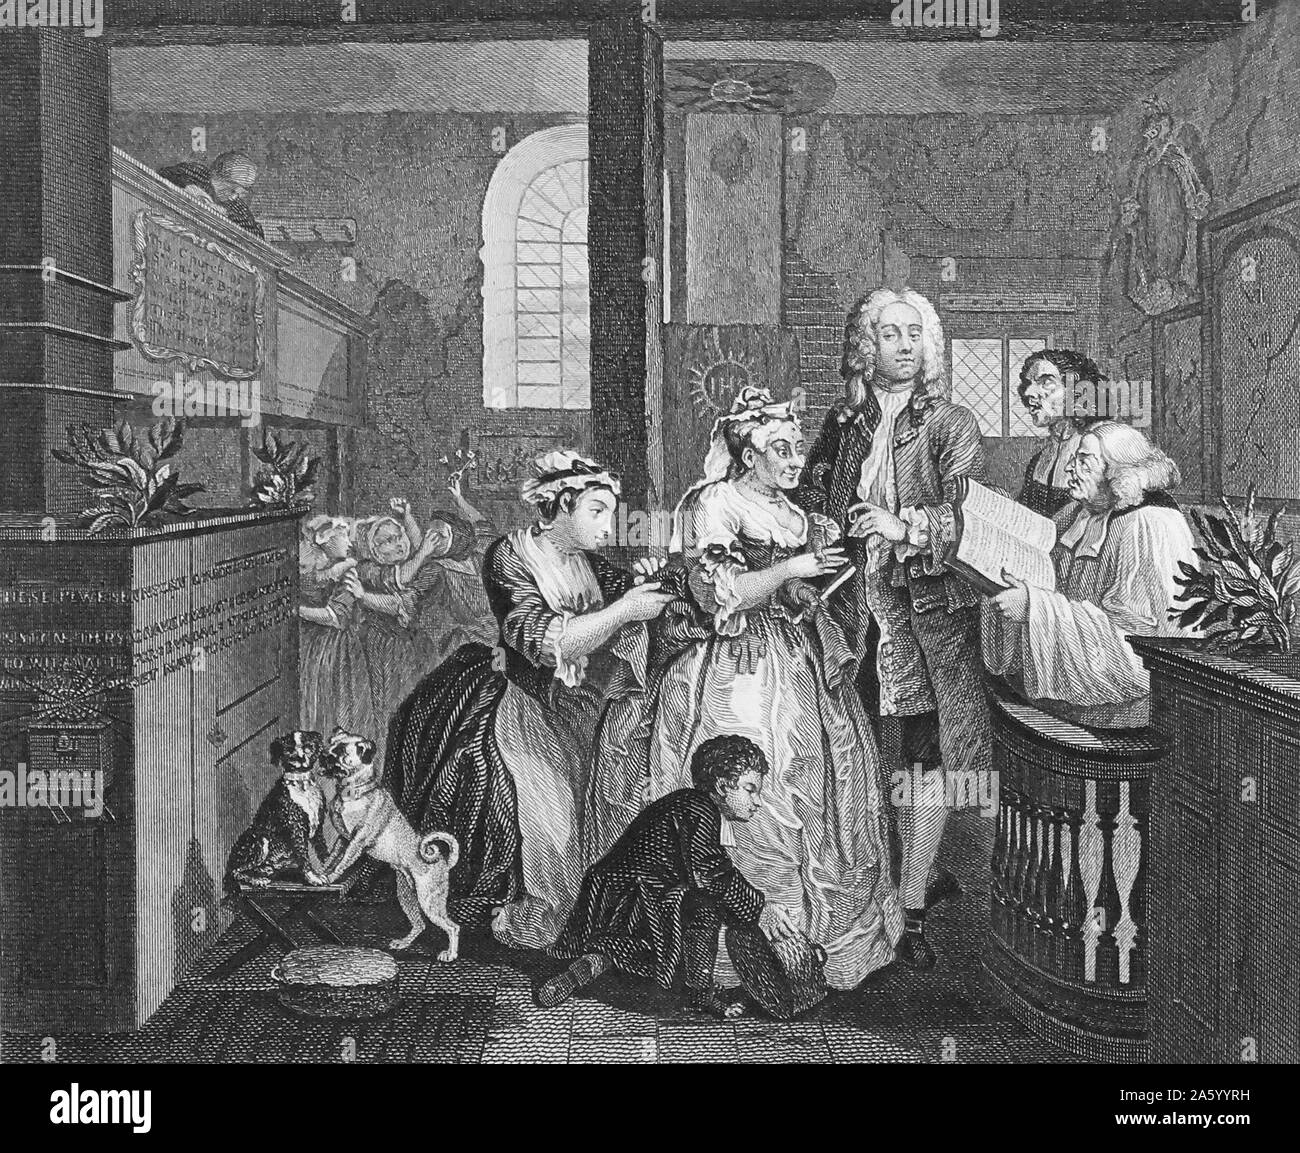 Engraving titled 'The Rake's Progress' by William Hogarth (1697-1764) English painter, printmaker, pictorial satirist, social critic, and editorial cartoonist who has been credited with pioneering western sequential art. Dated 18th Century. Stock Photo